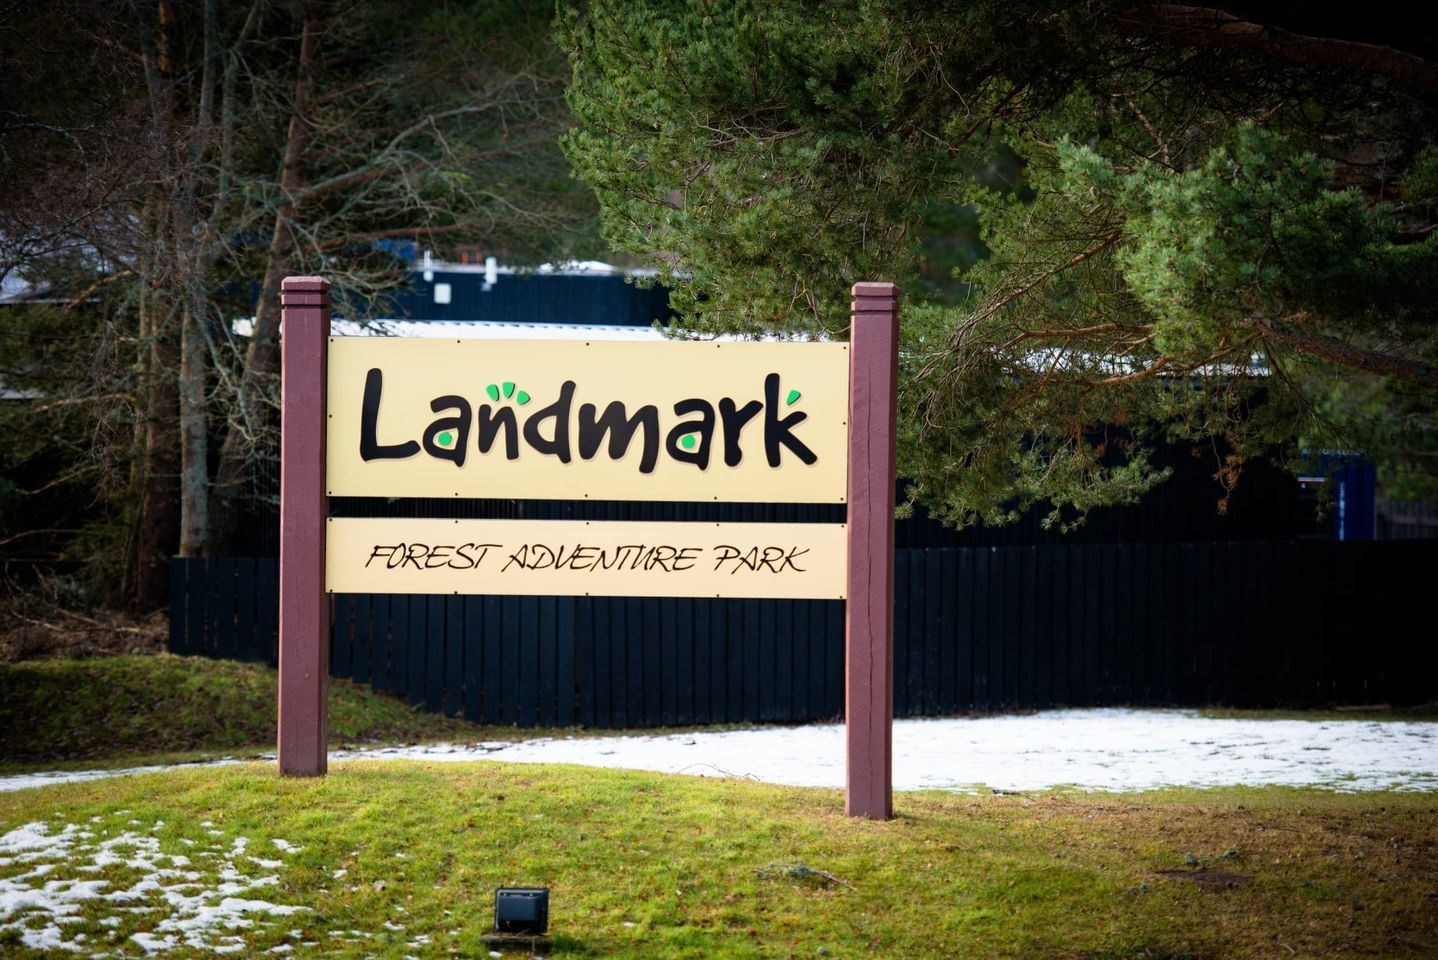 Landmark Forest Adventure Park have been forced to close several attractions in April.